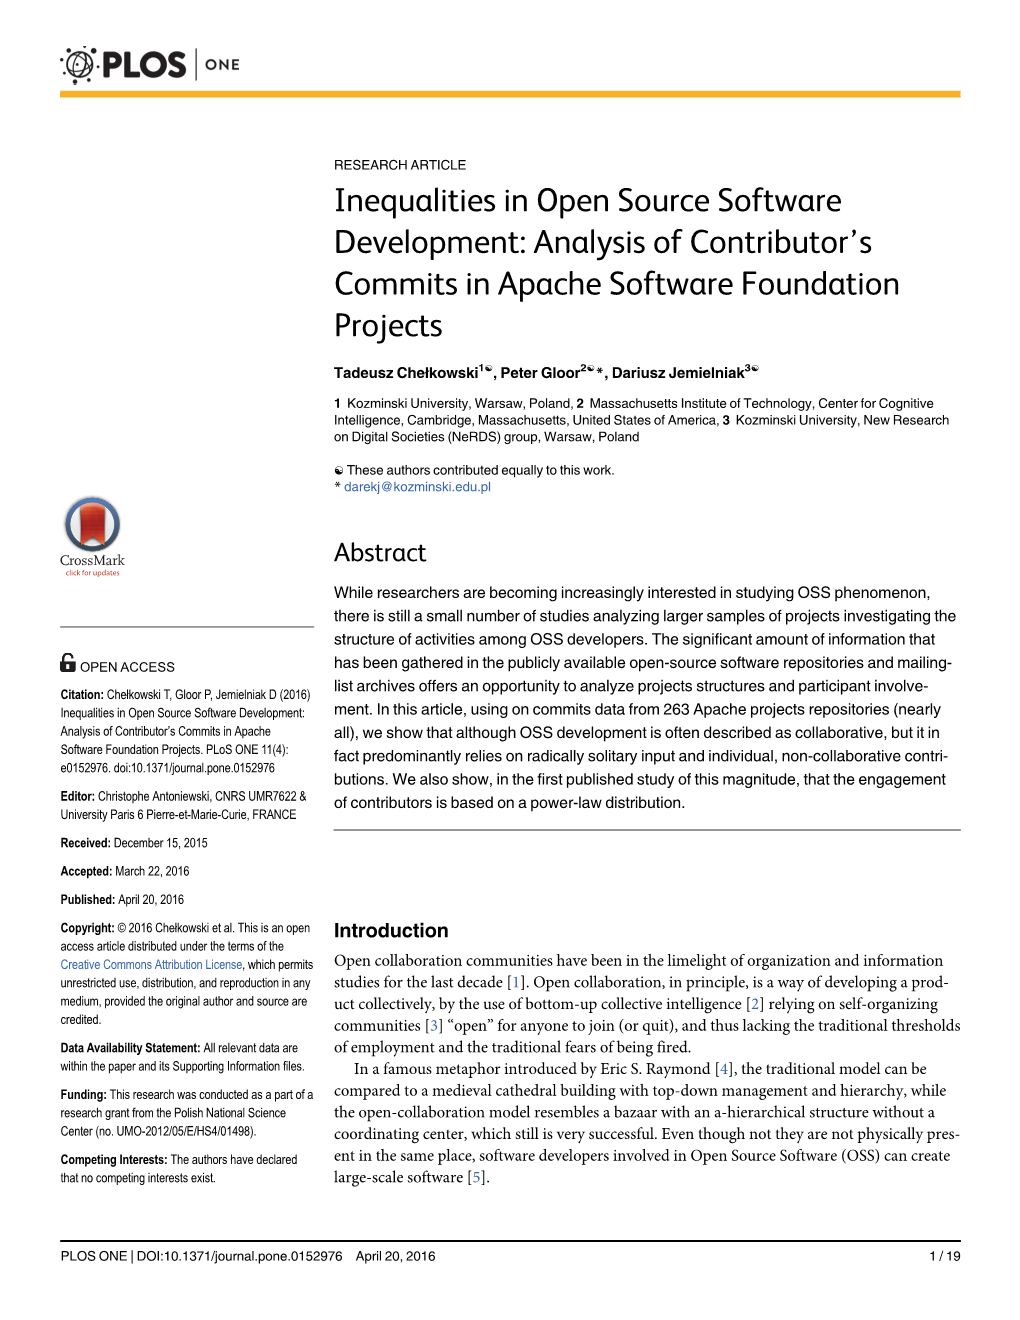 Inequalities in Open Source Software Development: Analysis of Contributor’S Commits in Apache Software Foundation Projects